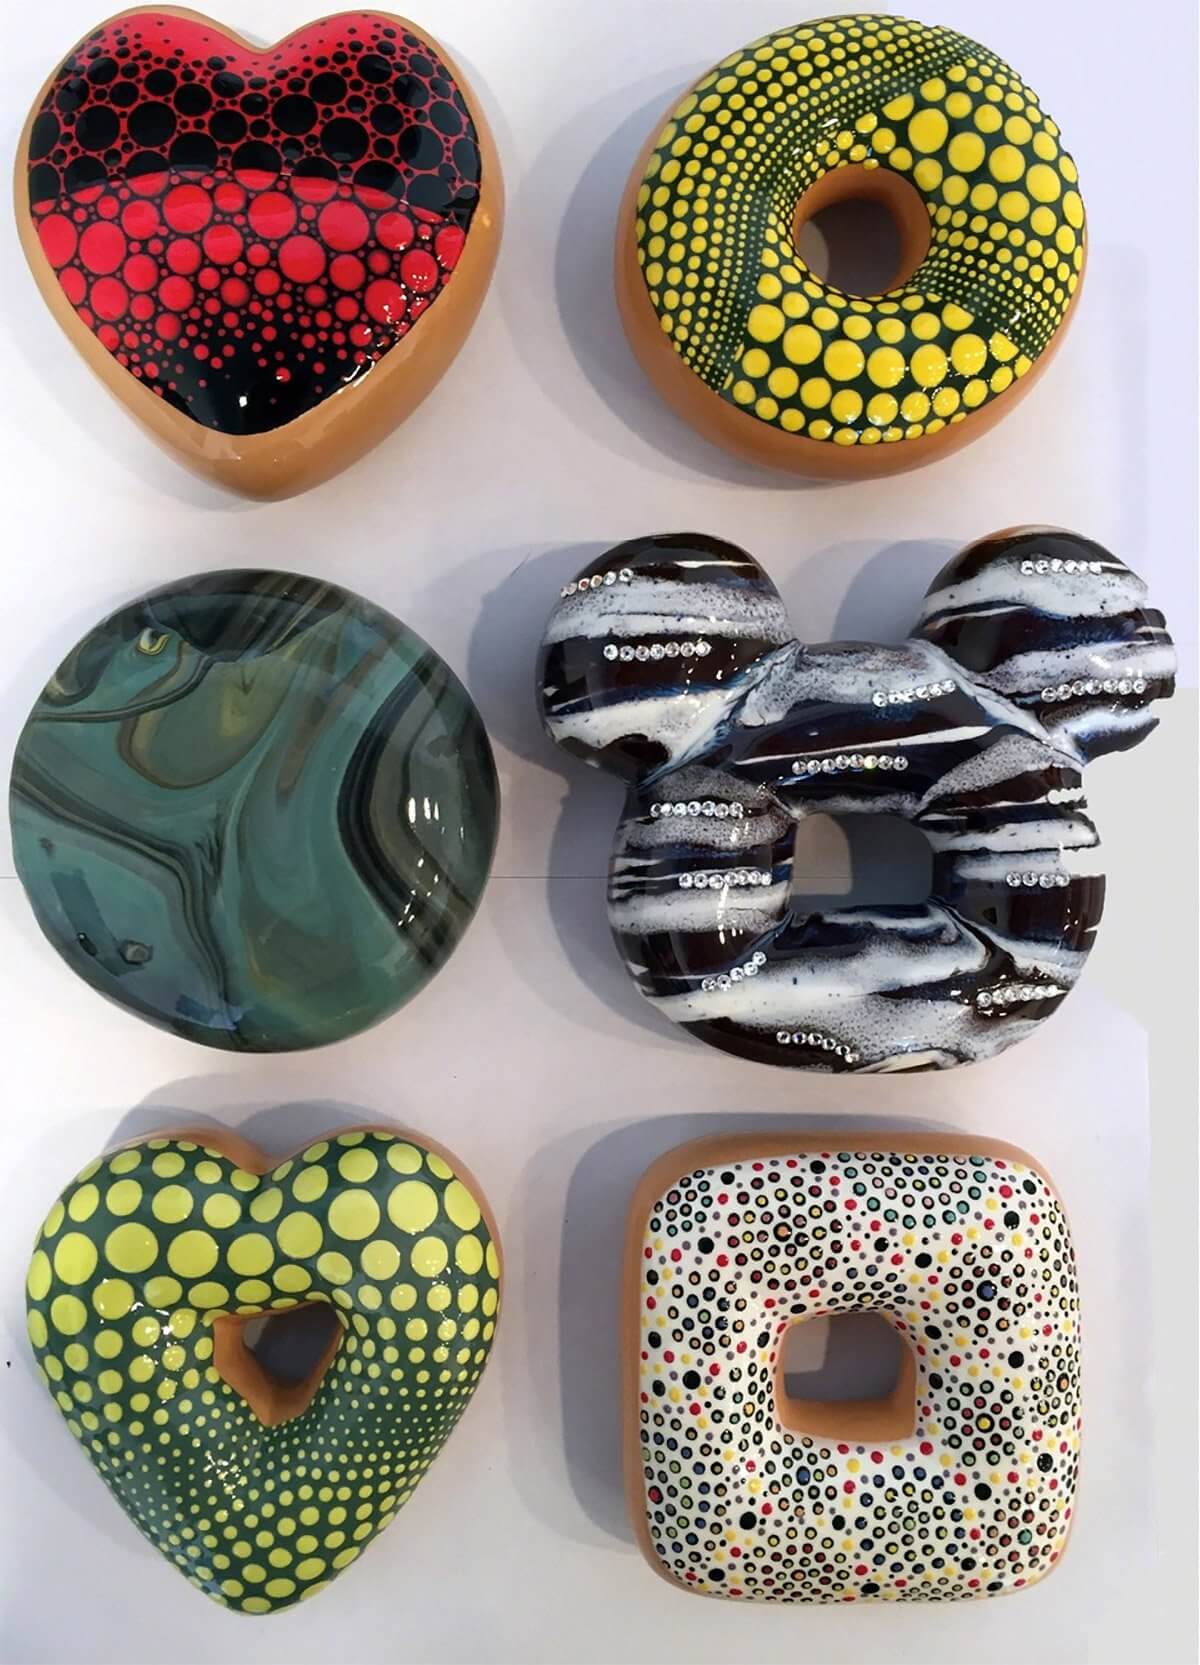 Ceramic Donuts by Jae Yong Kim That Are Too Good Looking Not To Eat